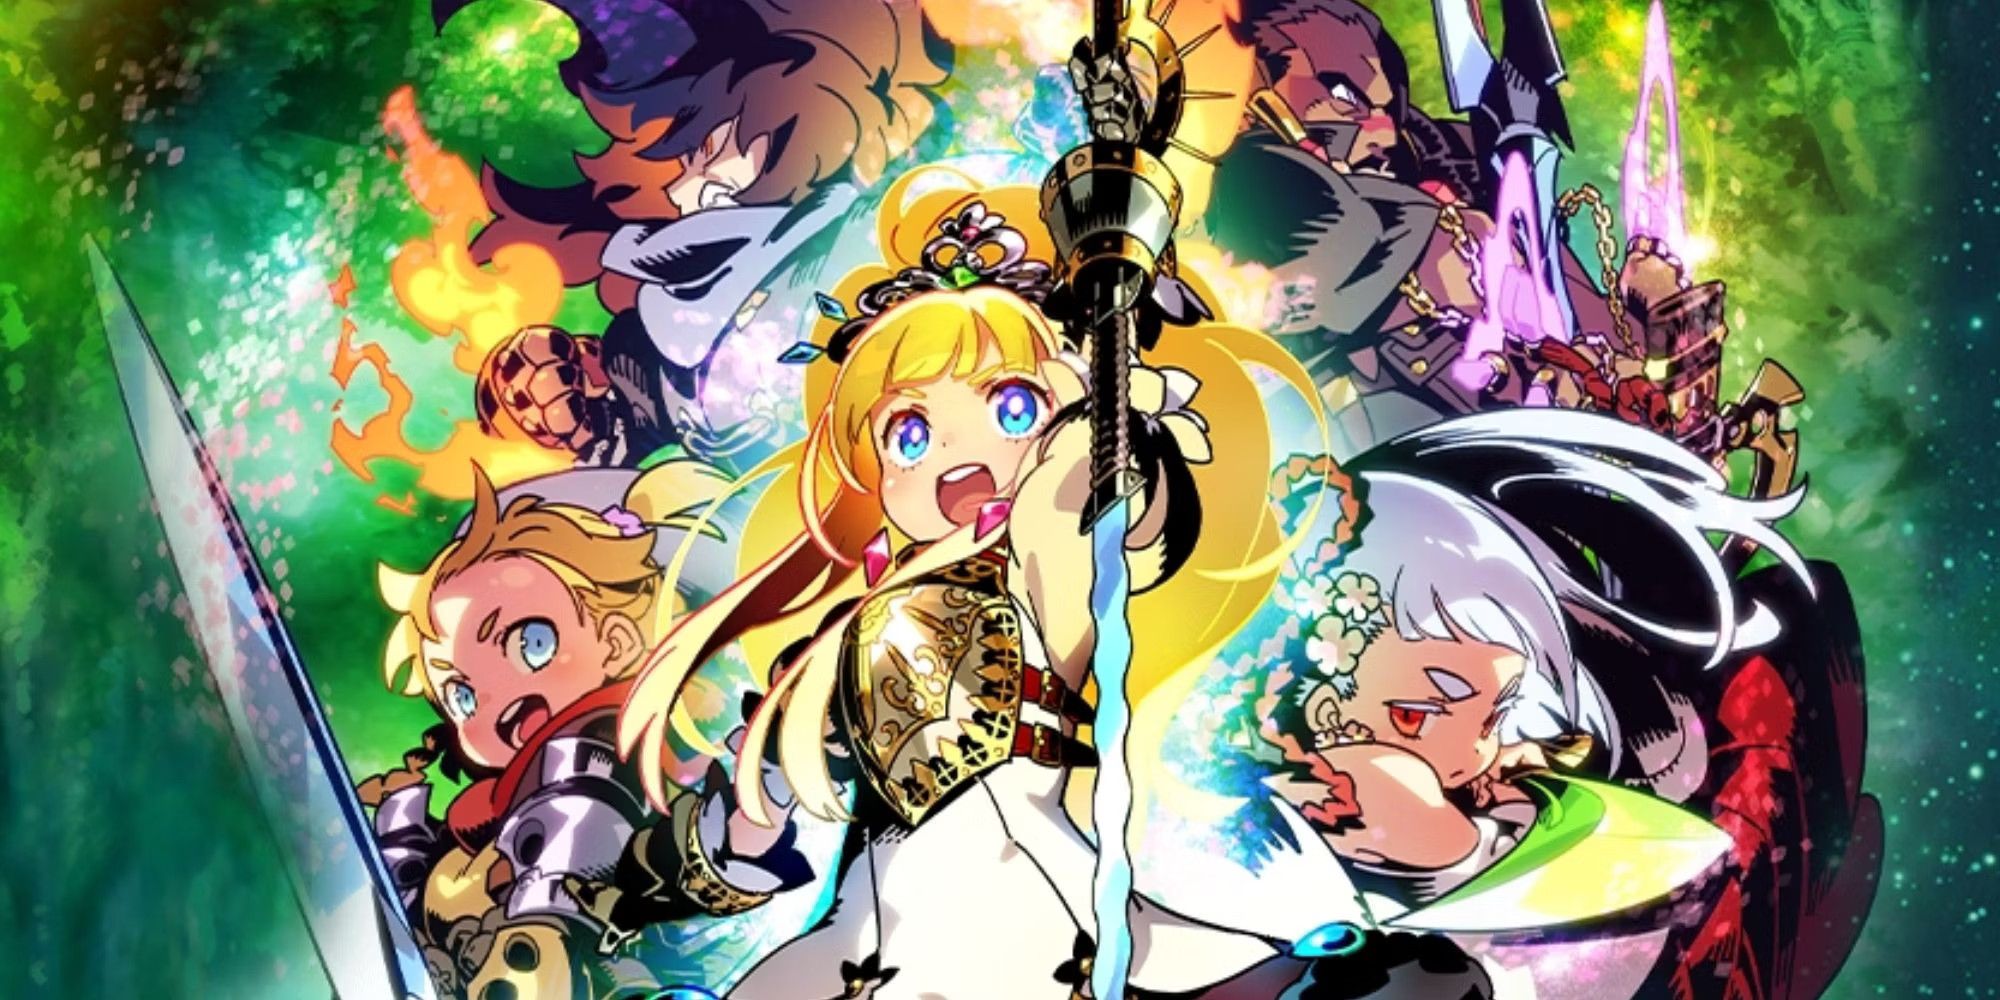 Etrian Odyssey characters grouped up together